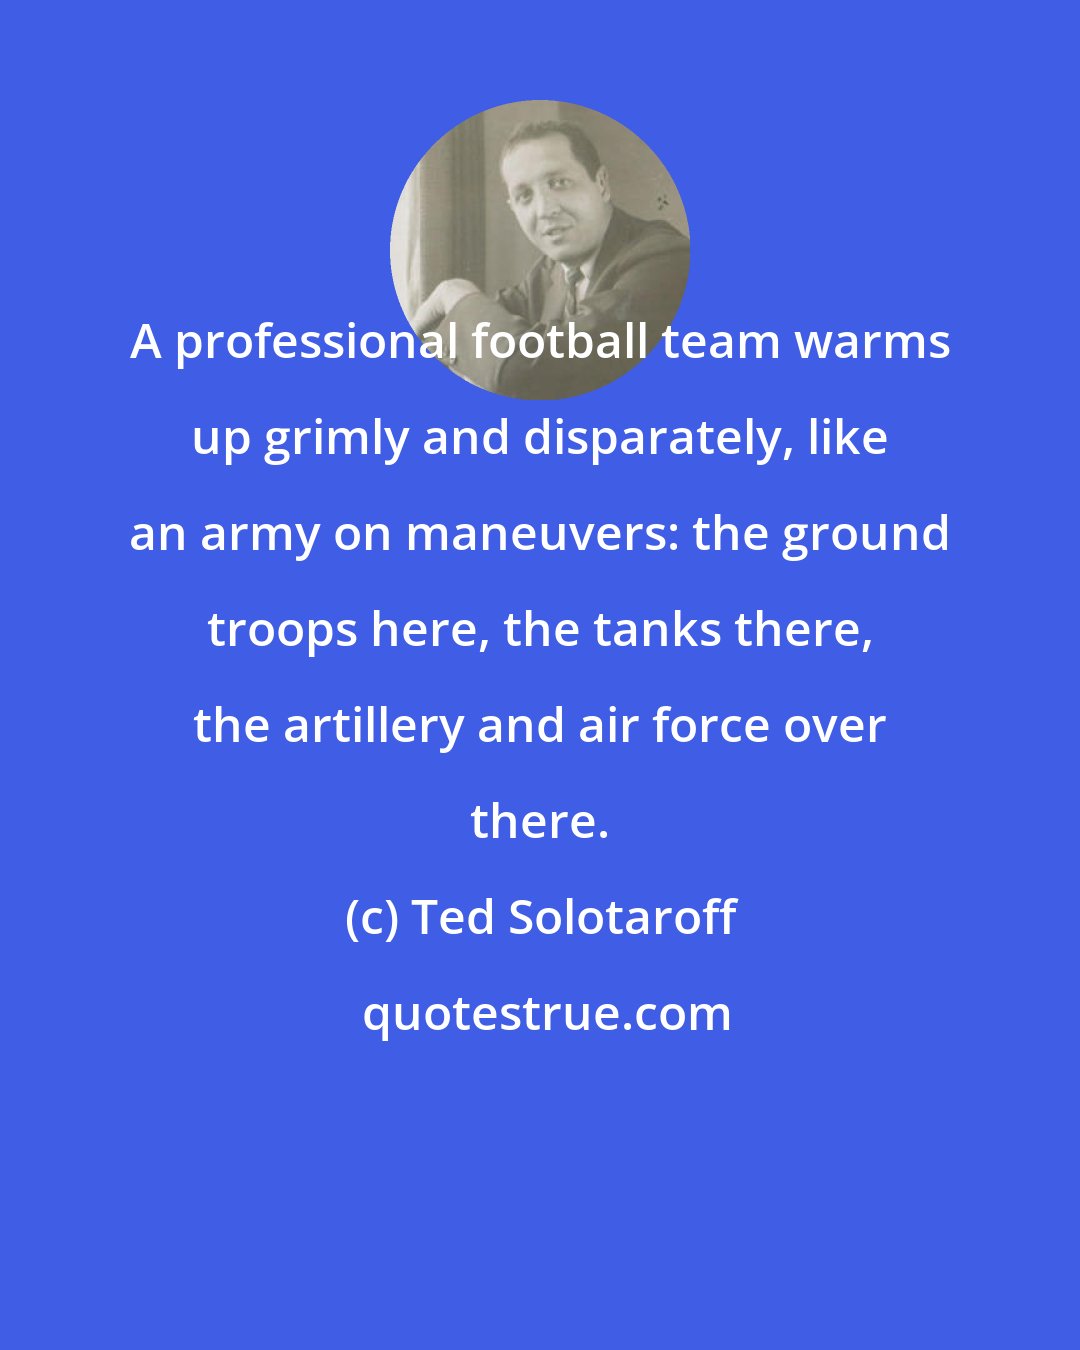 Ted Solotaroff: A professional football team warms up grimly and disparately, like an army on maneuvers: the ground troops here, the tanks there, the artillery and air force over there.